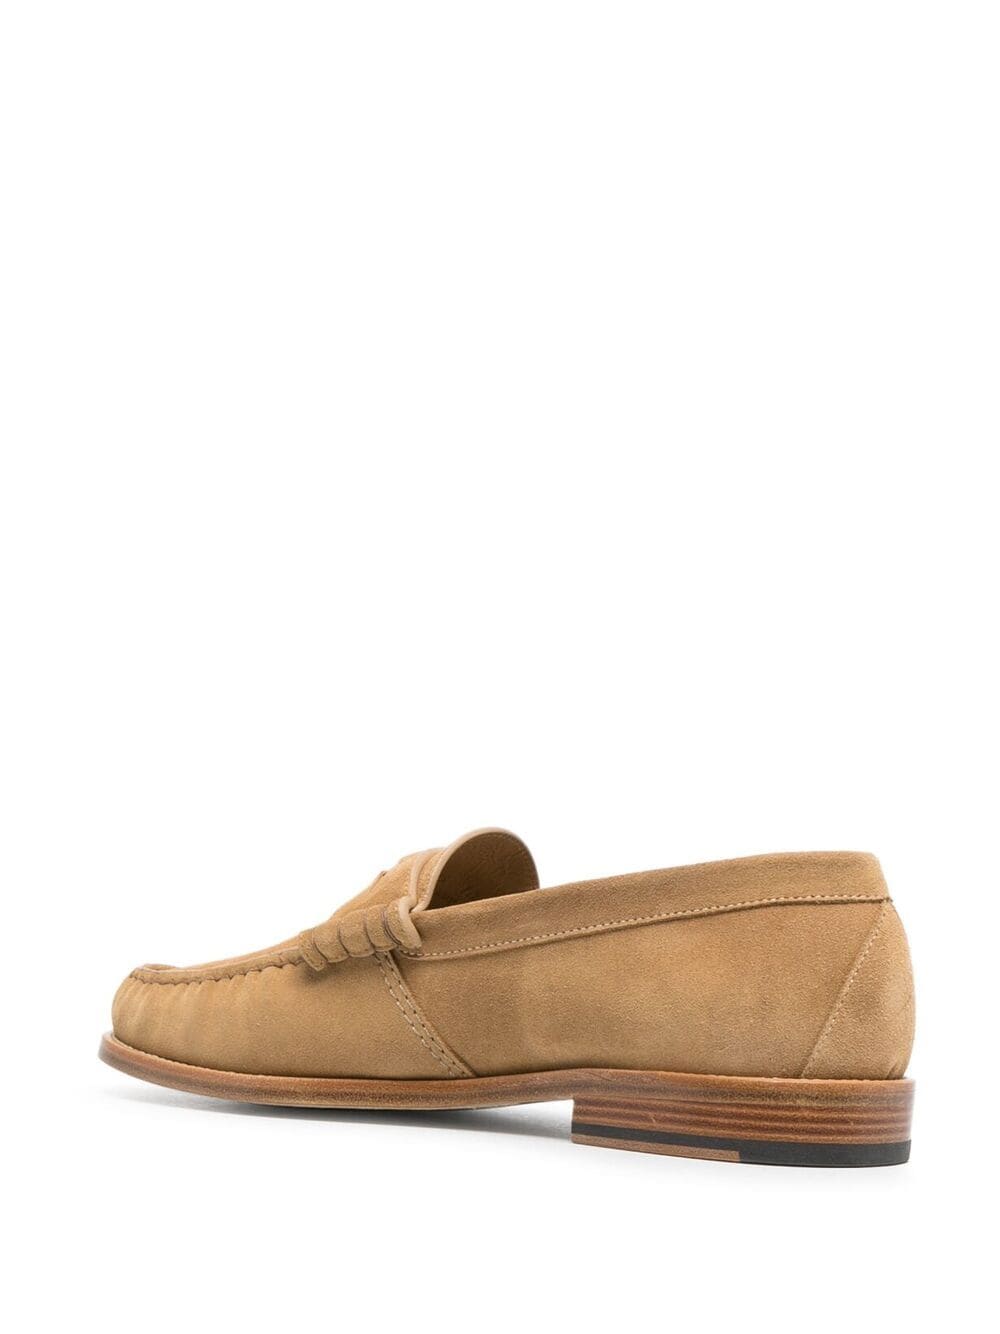 STRAP-DETAIL SUEDE LOAFERS